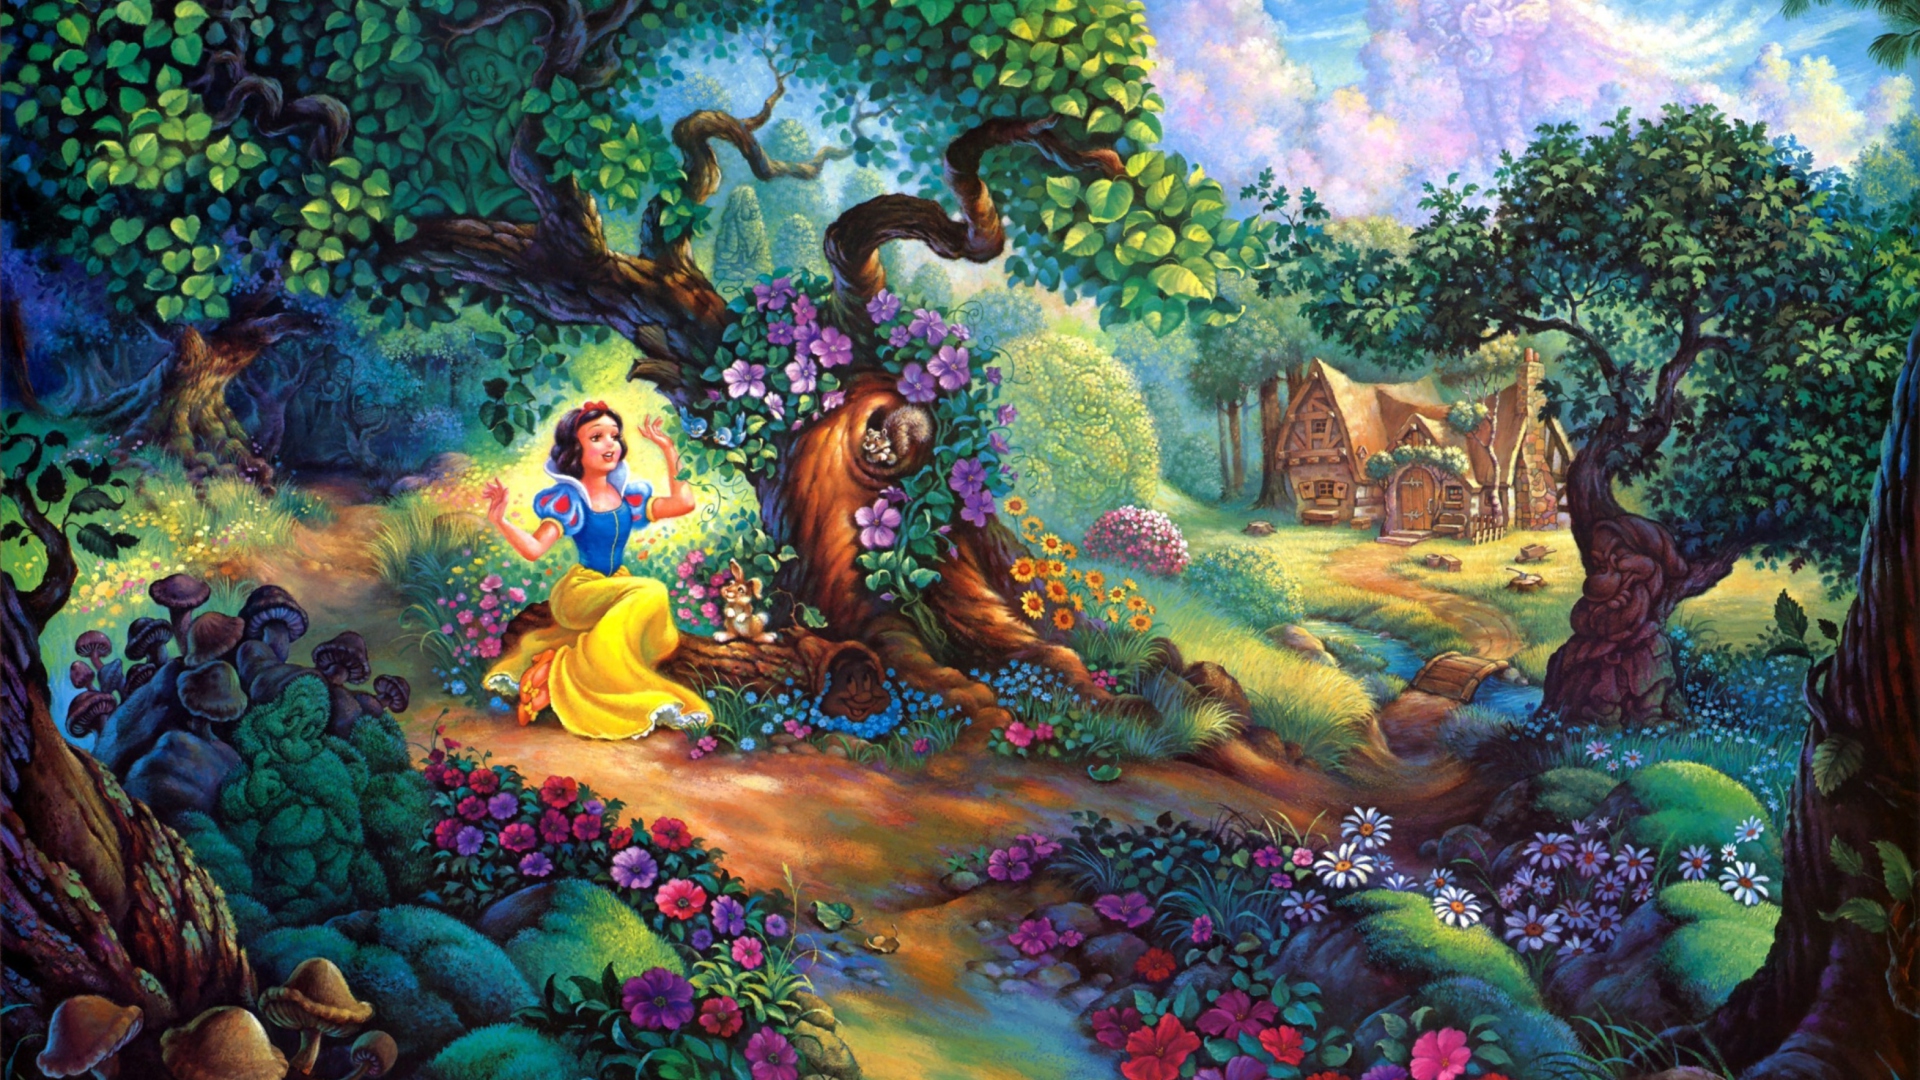 Snow White In Magical Forest wallpaper 1920x1080